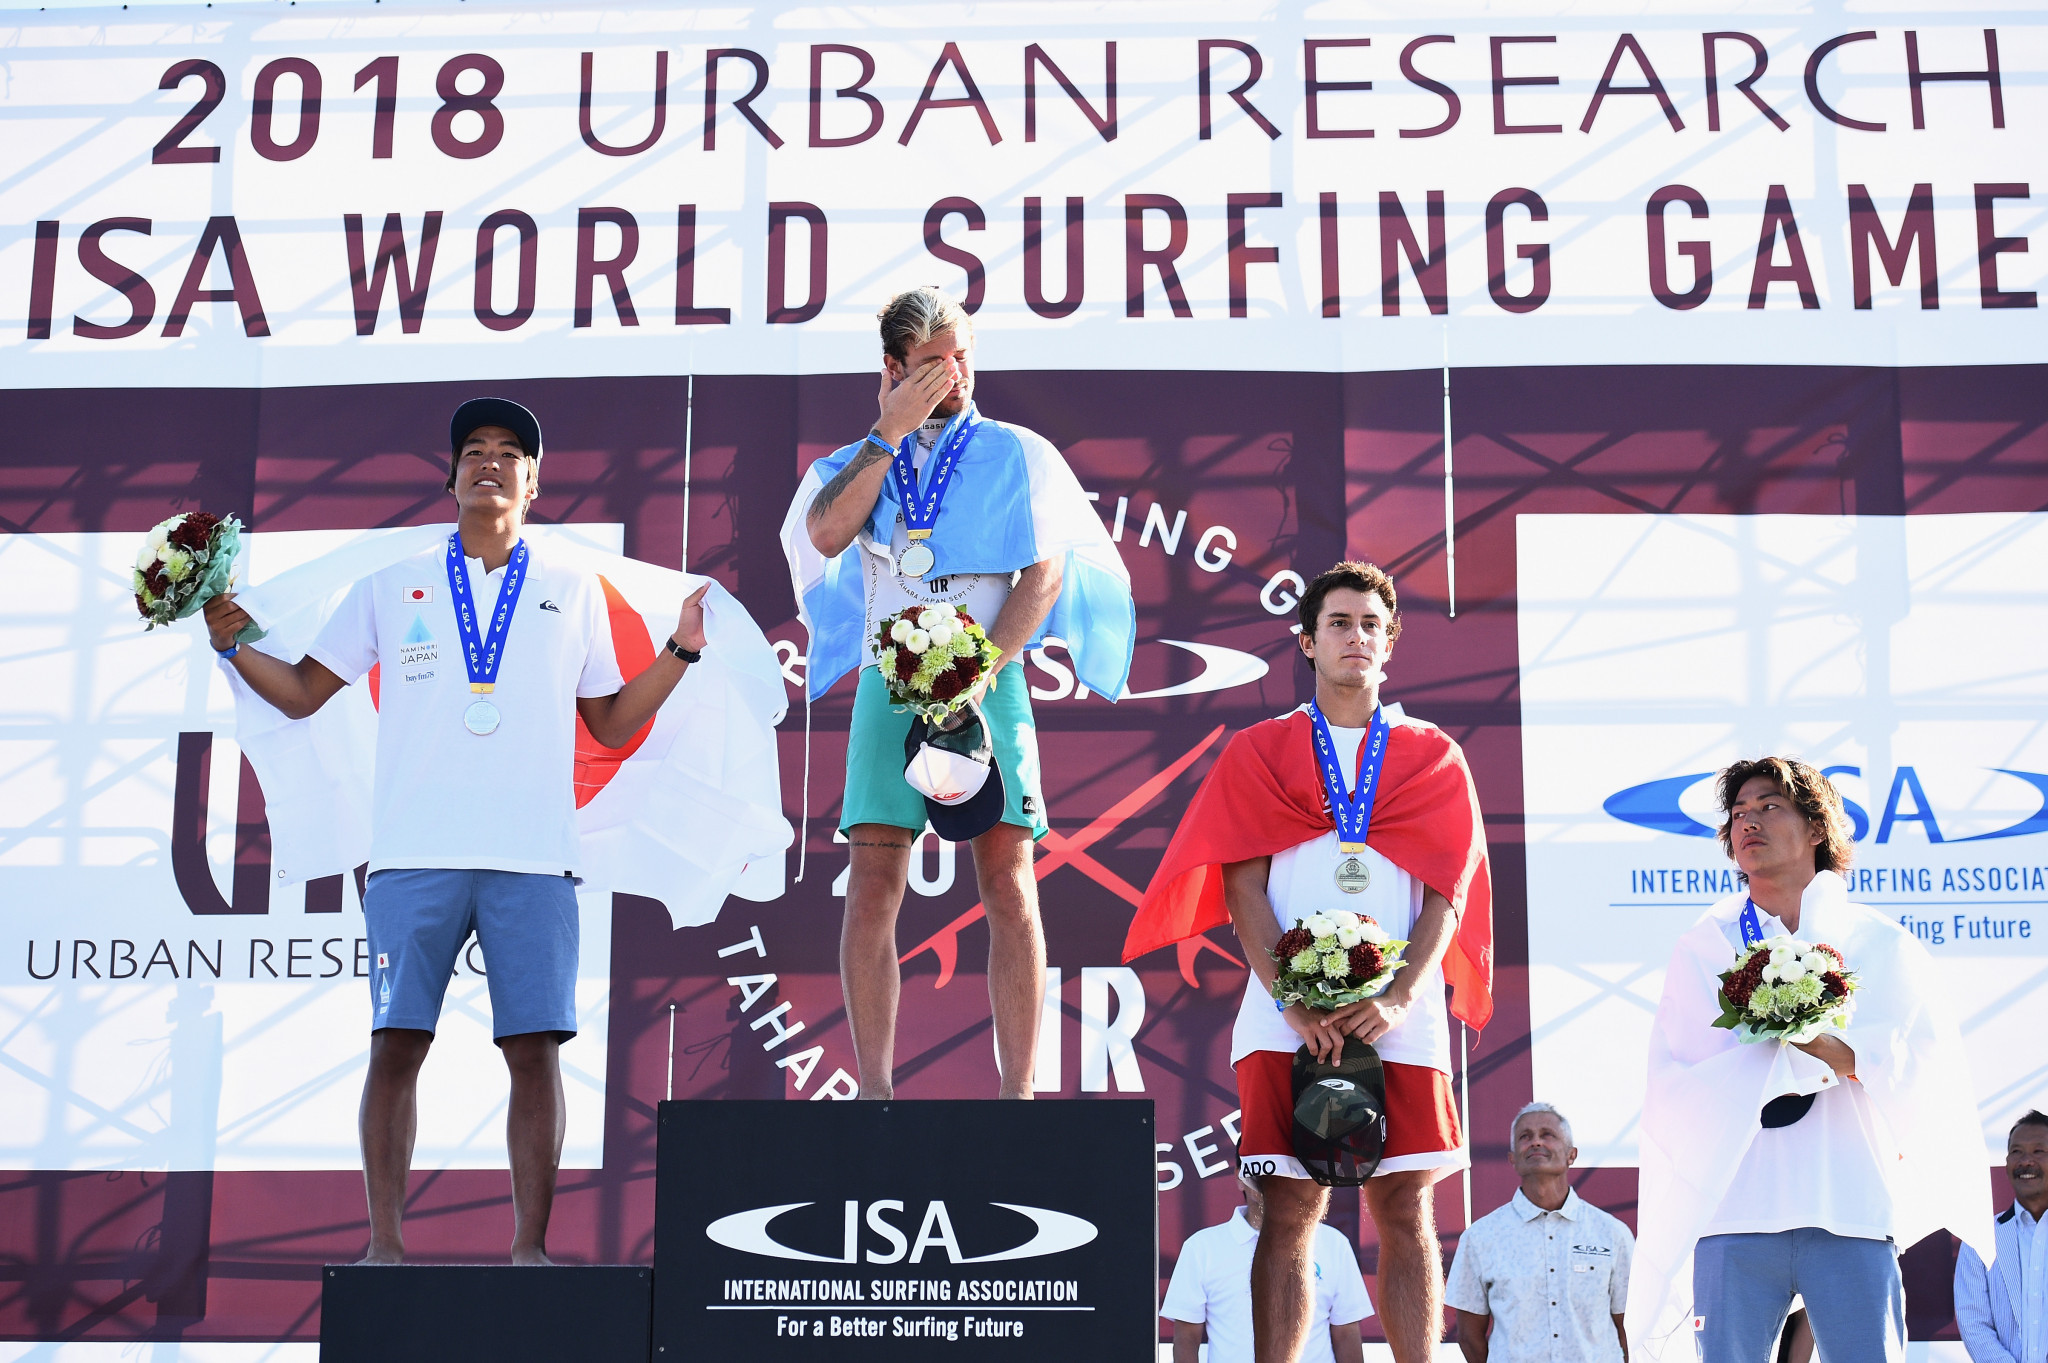 Santiago Muñiz of Argentina, Kanoa Igarashi, of Japan, Lucca Mesinas of Peru and Shun Murakami of Japan on the podium after earning medals at the ISA World Surfing Games in Tahara in Japan ©Getty Images